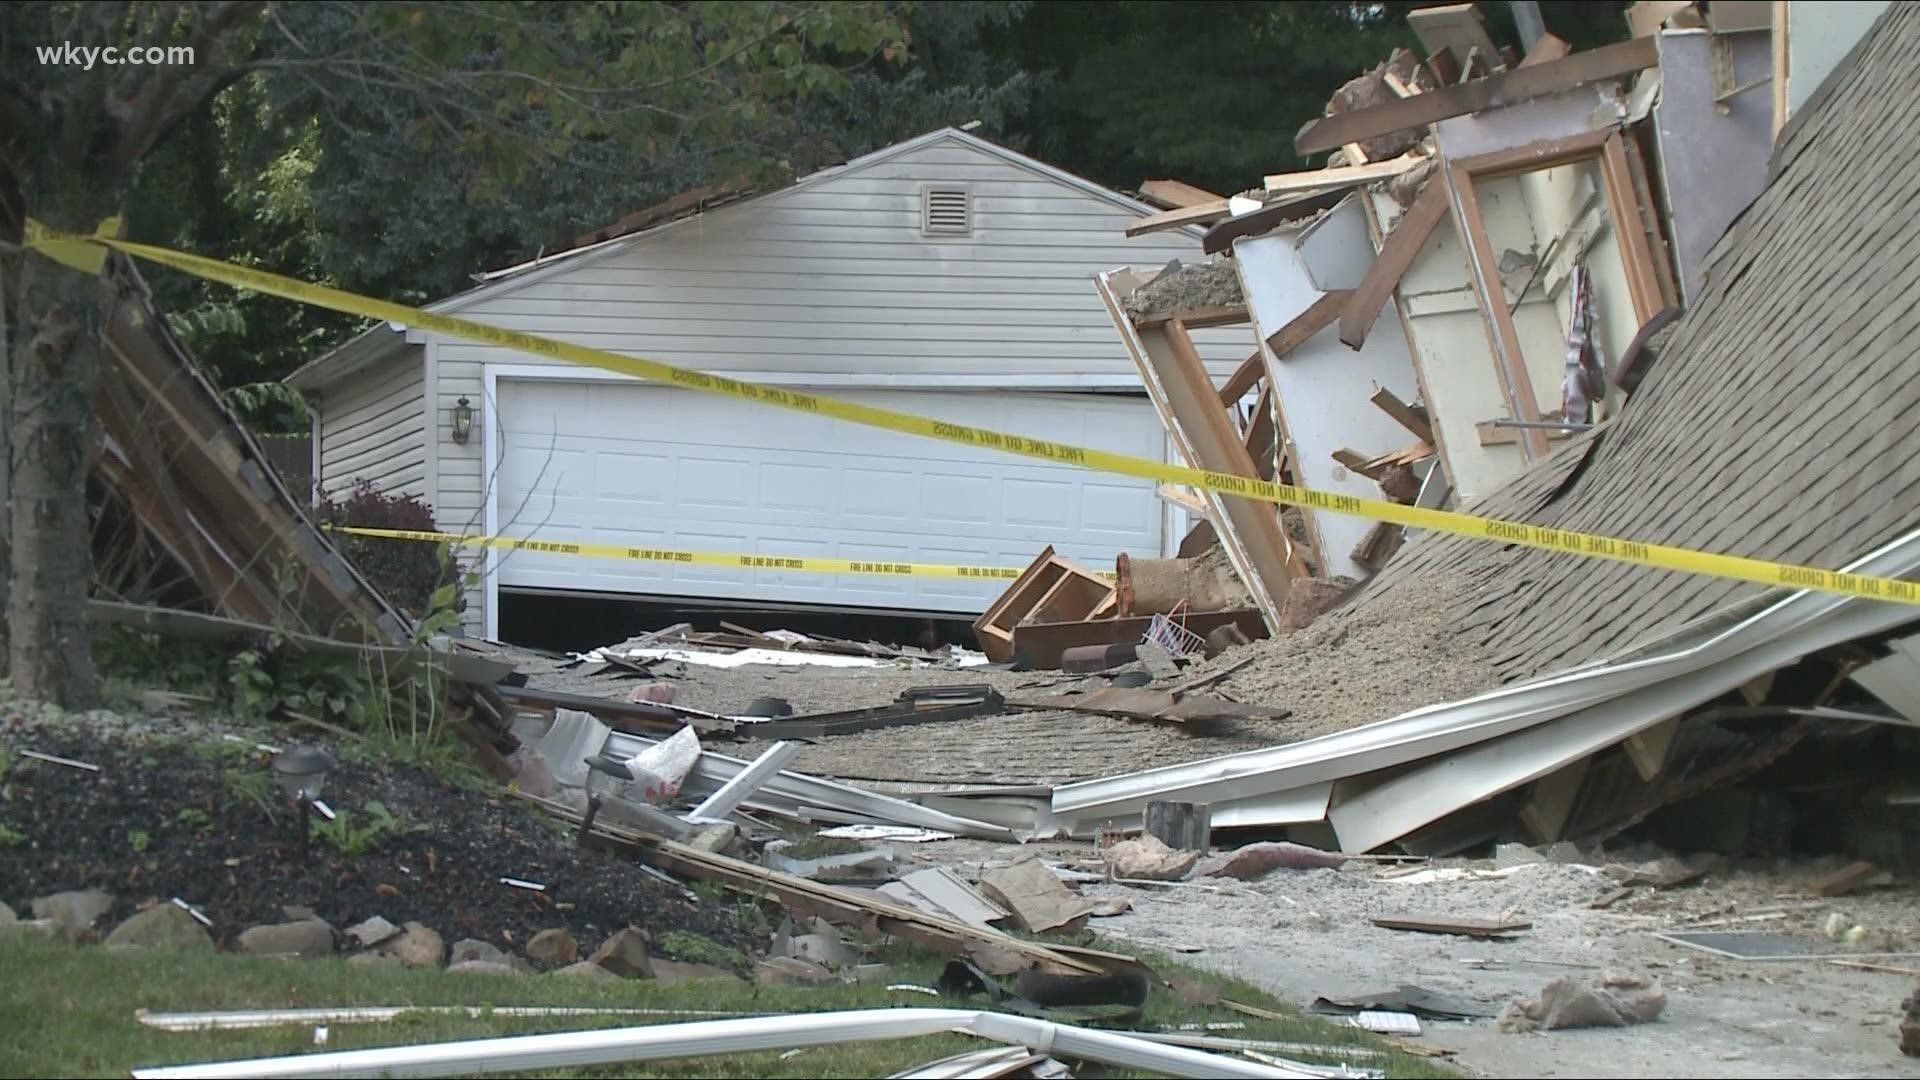 The Akron Fire Department is investigating the cause of the home collapse. One person was injured.